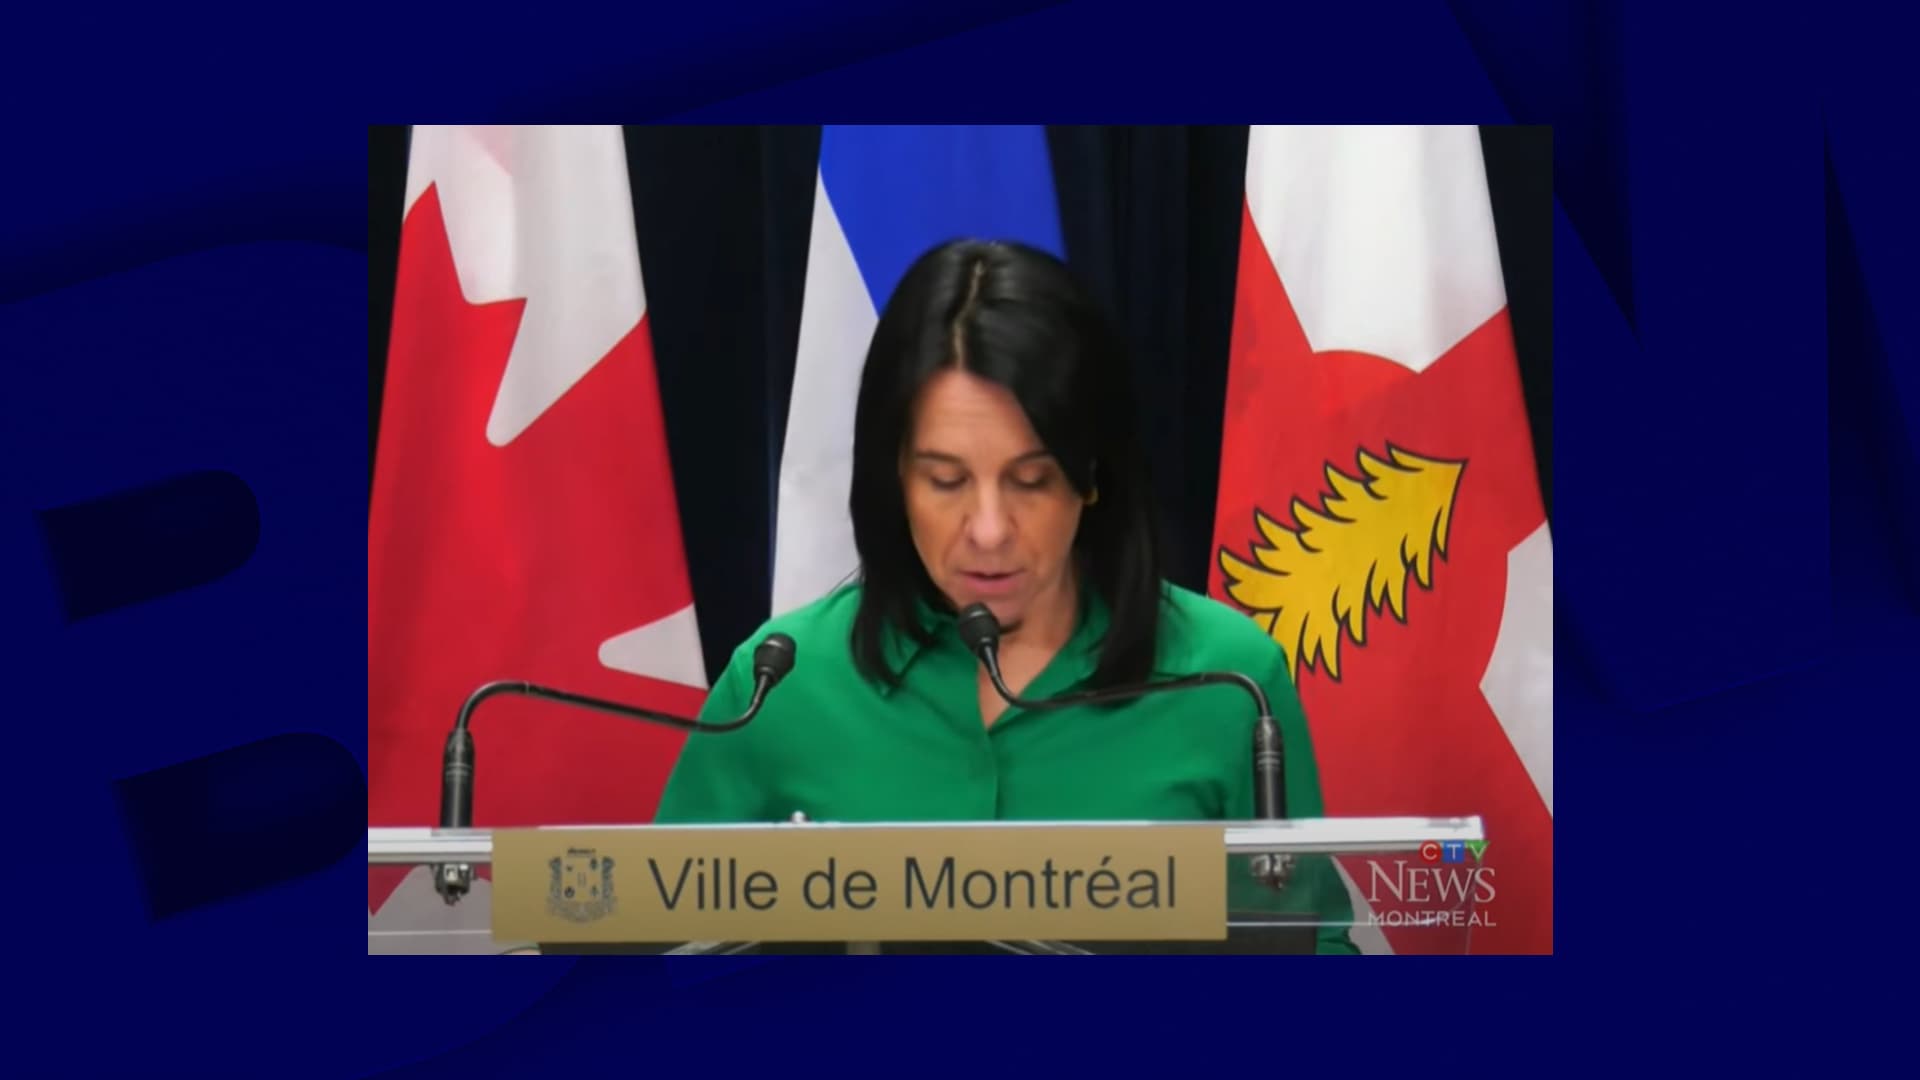 Montreal Mayor Valérie Plante feels uncomfortable in the middle of a press conference